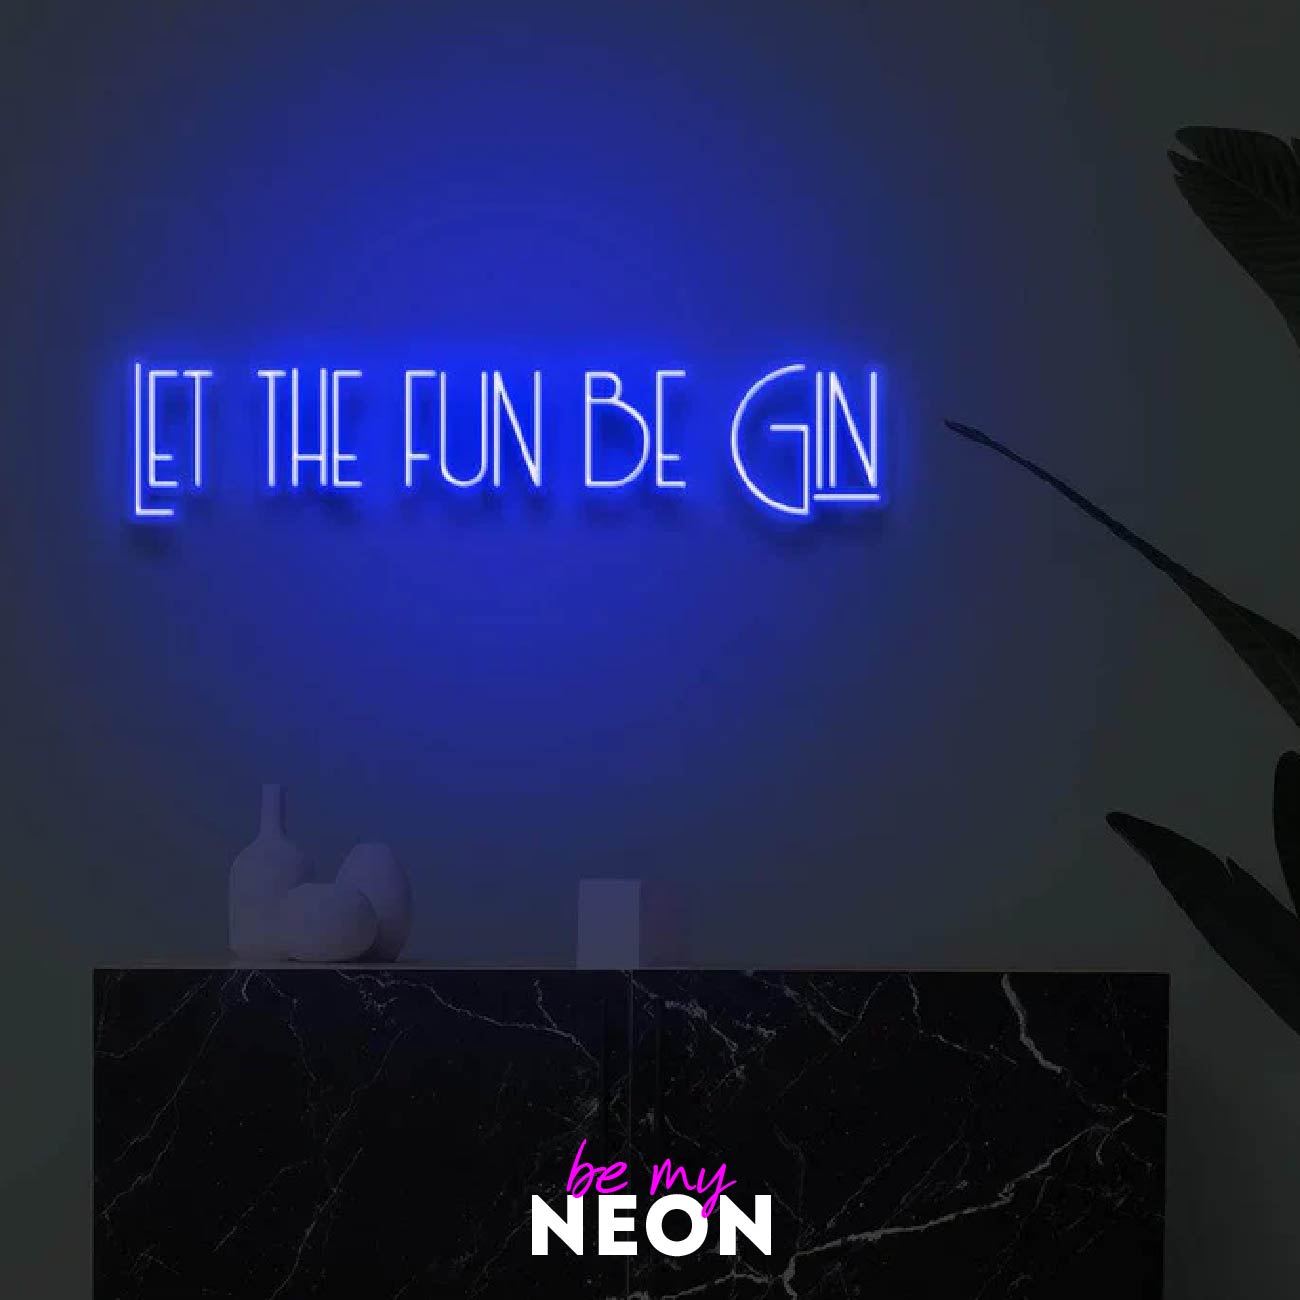 "Let the fun be Gin" LED Neonschild